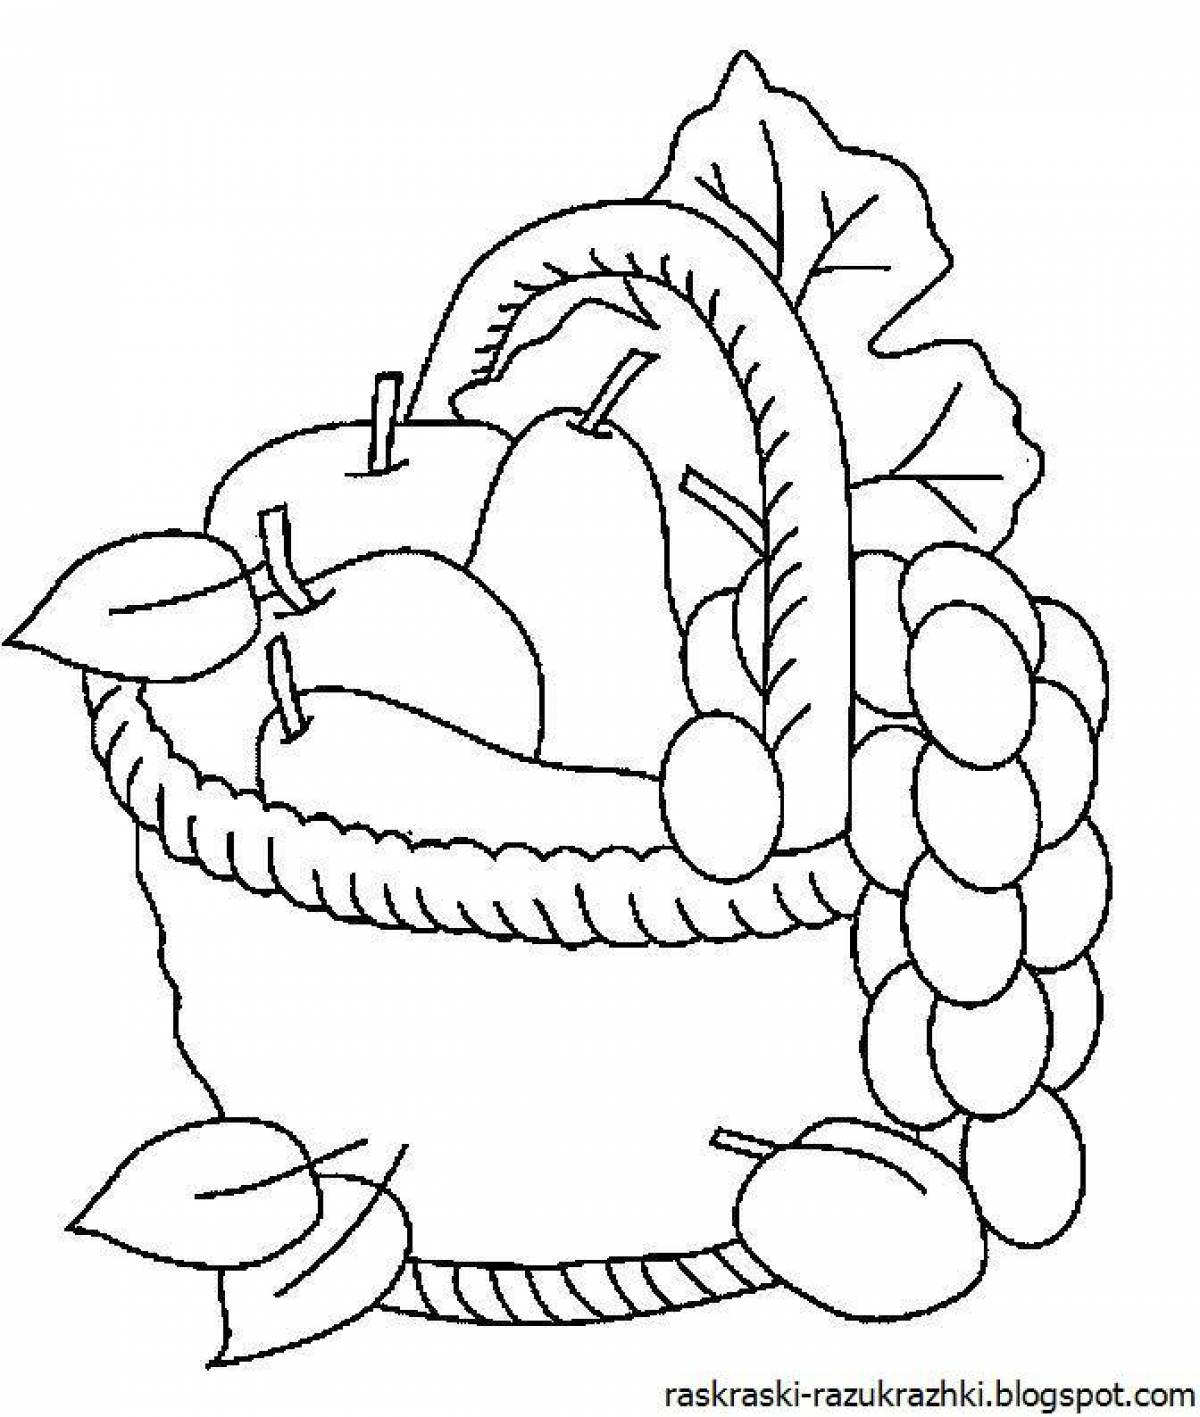 Cheerful still life coloring for children